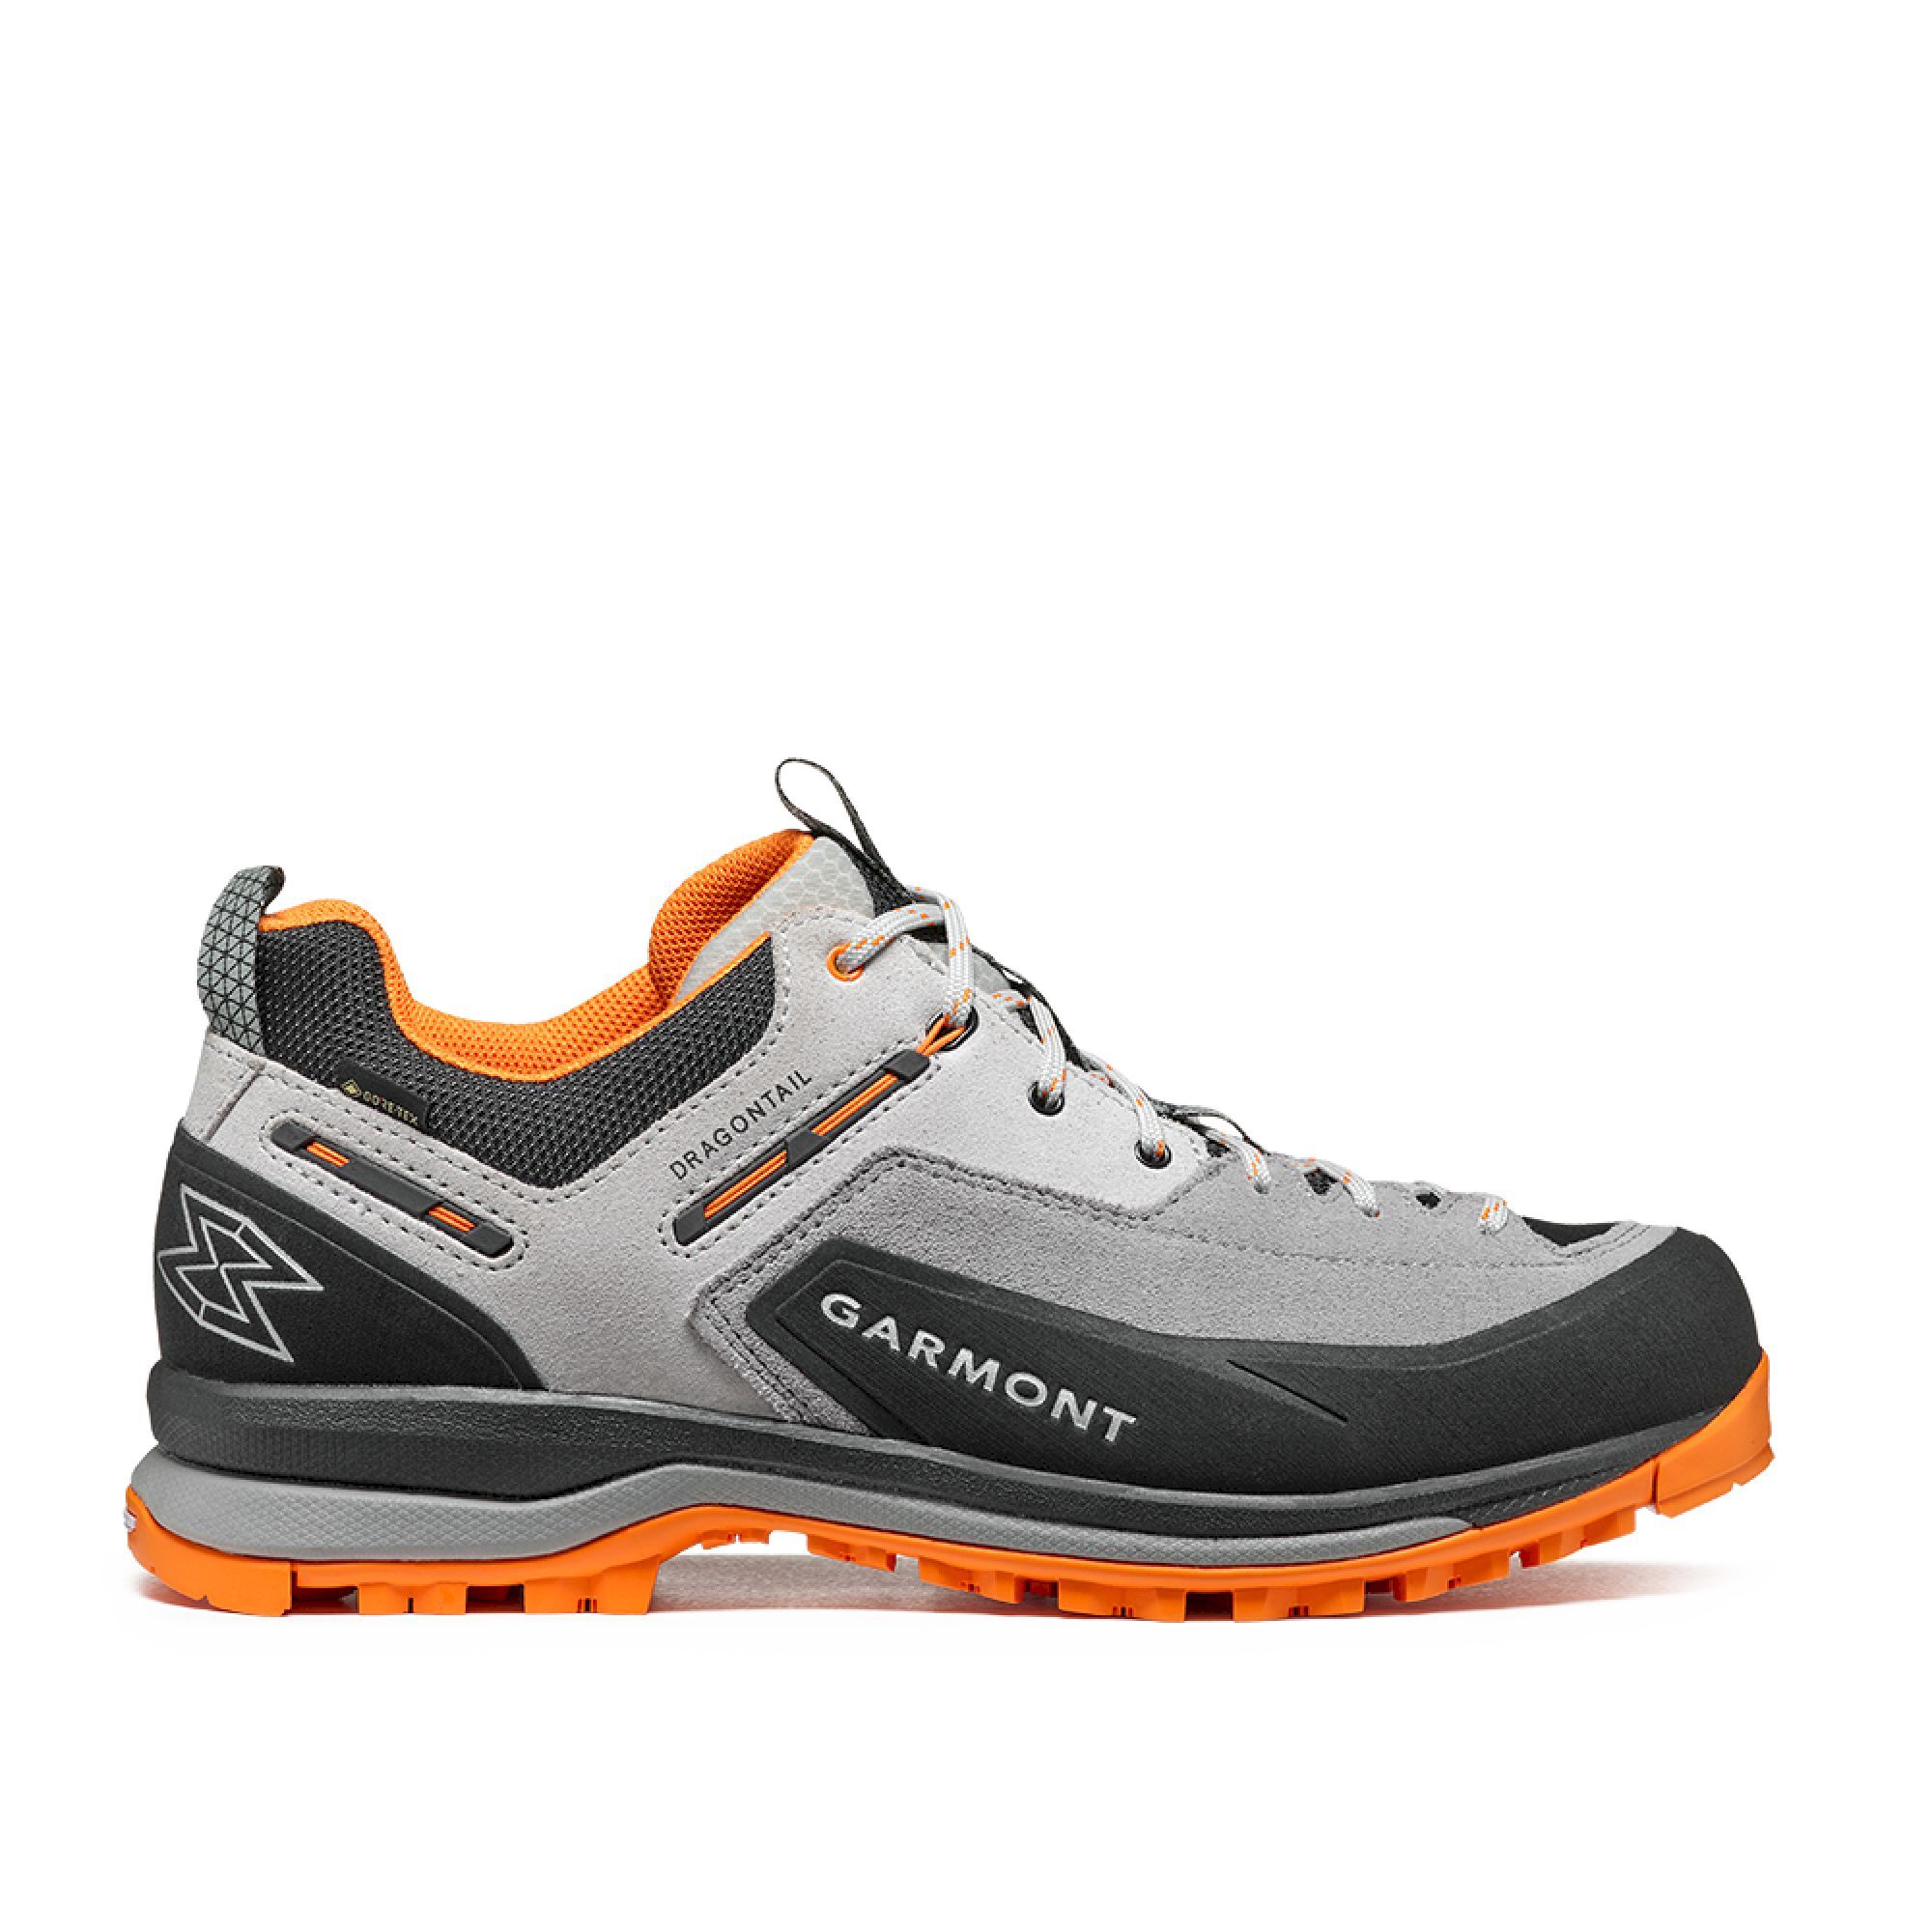 Garmont Dragontail Tech GTX - Limited Edition - Approachskor | Hardloop